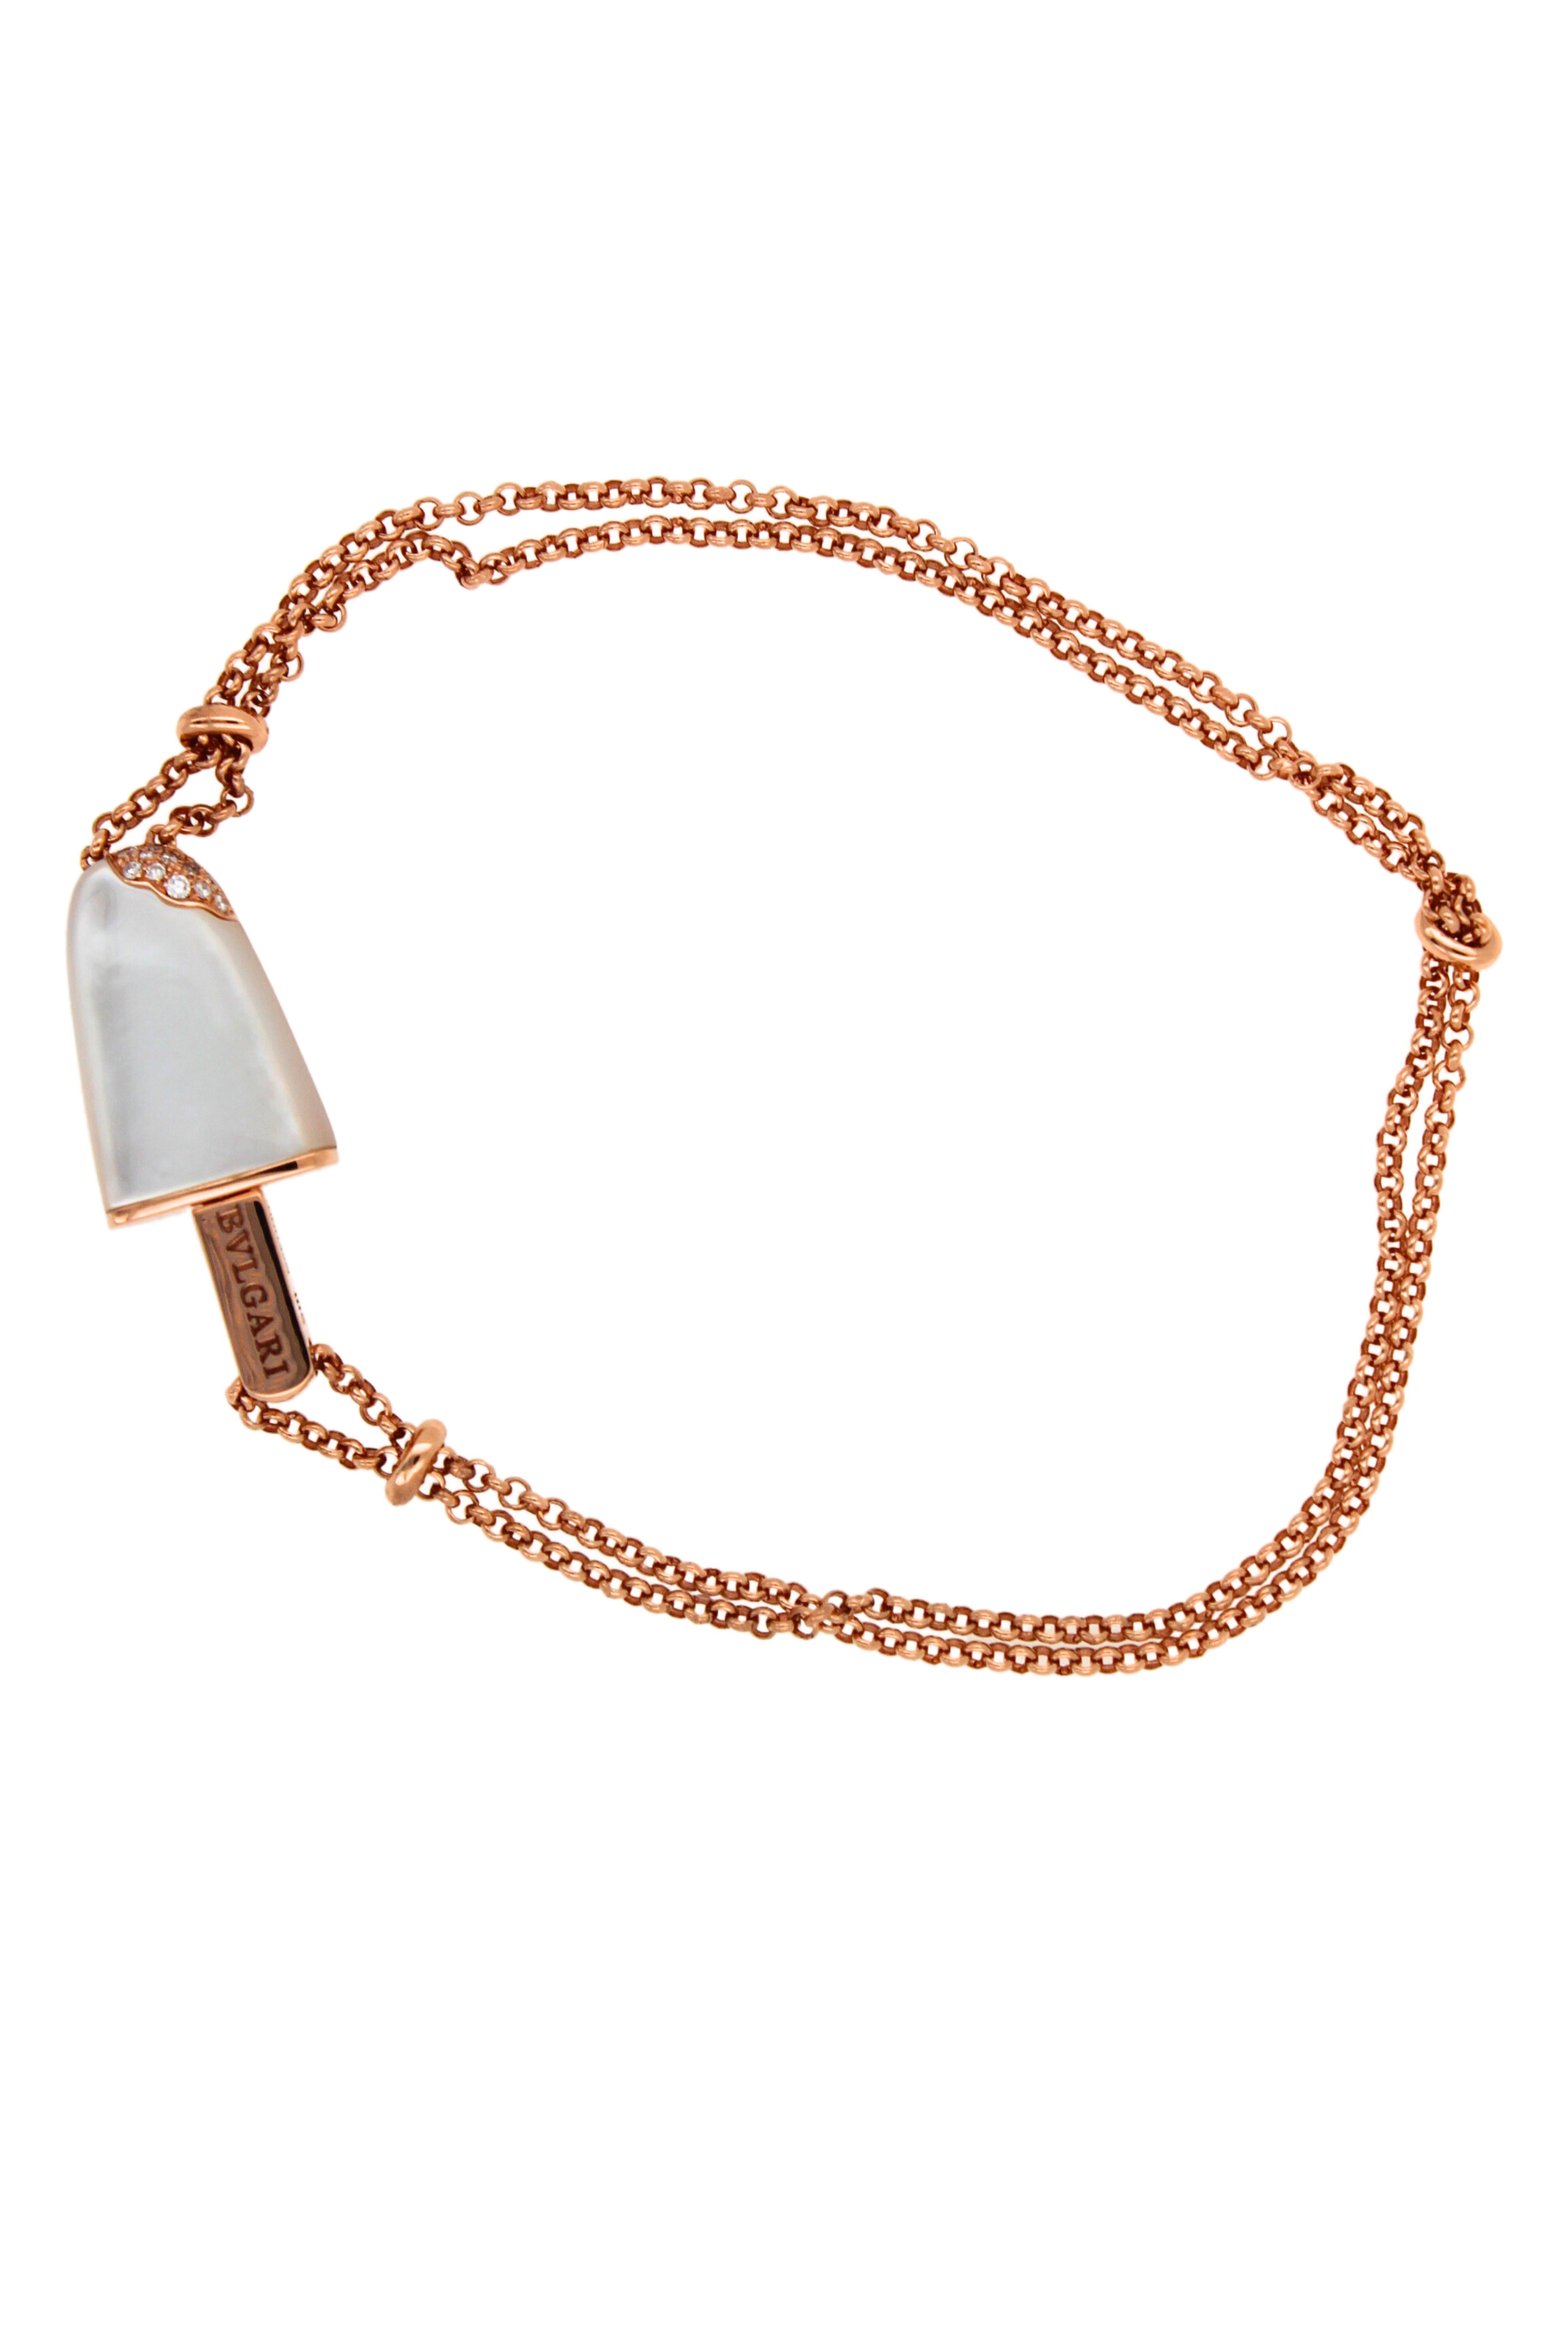 Extremely Rare / Discontinued / No Longer Available Bvlgari Collection - 
Gelati/Gelato Ice Cream White MOP Diamond Pave Double Chain Bracelet
18K Rose Gold / AU 750 (Confirmed by precious metal scan & gold purity tests)
Length: 7.5 Inches